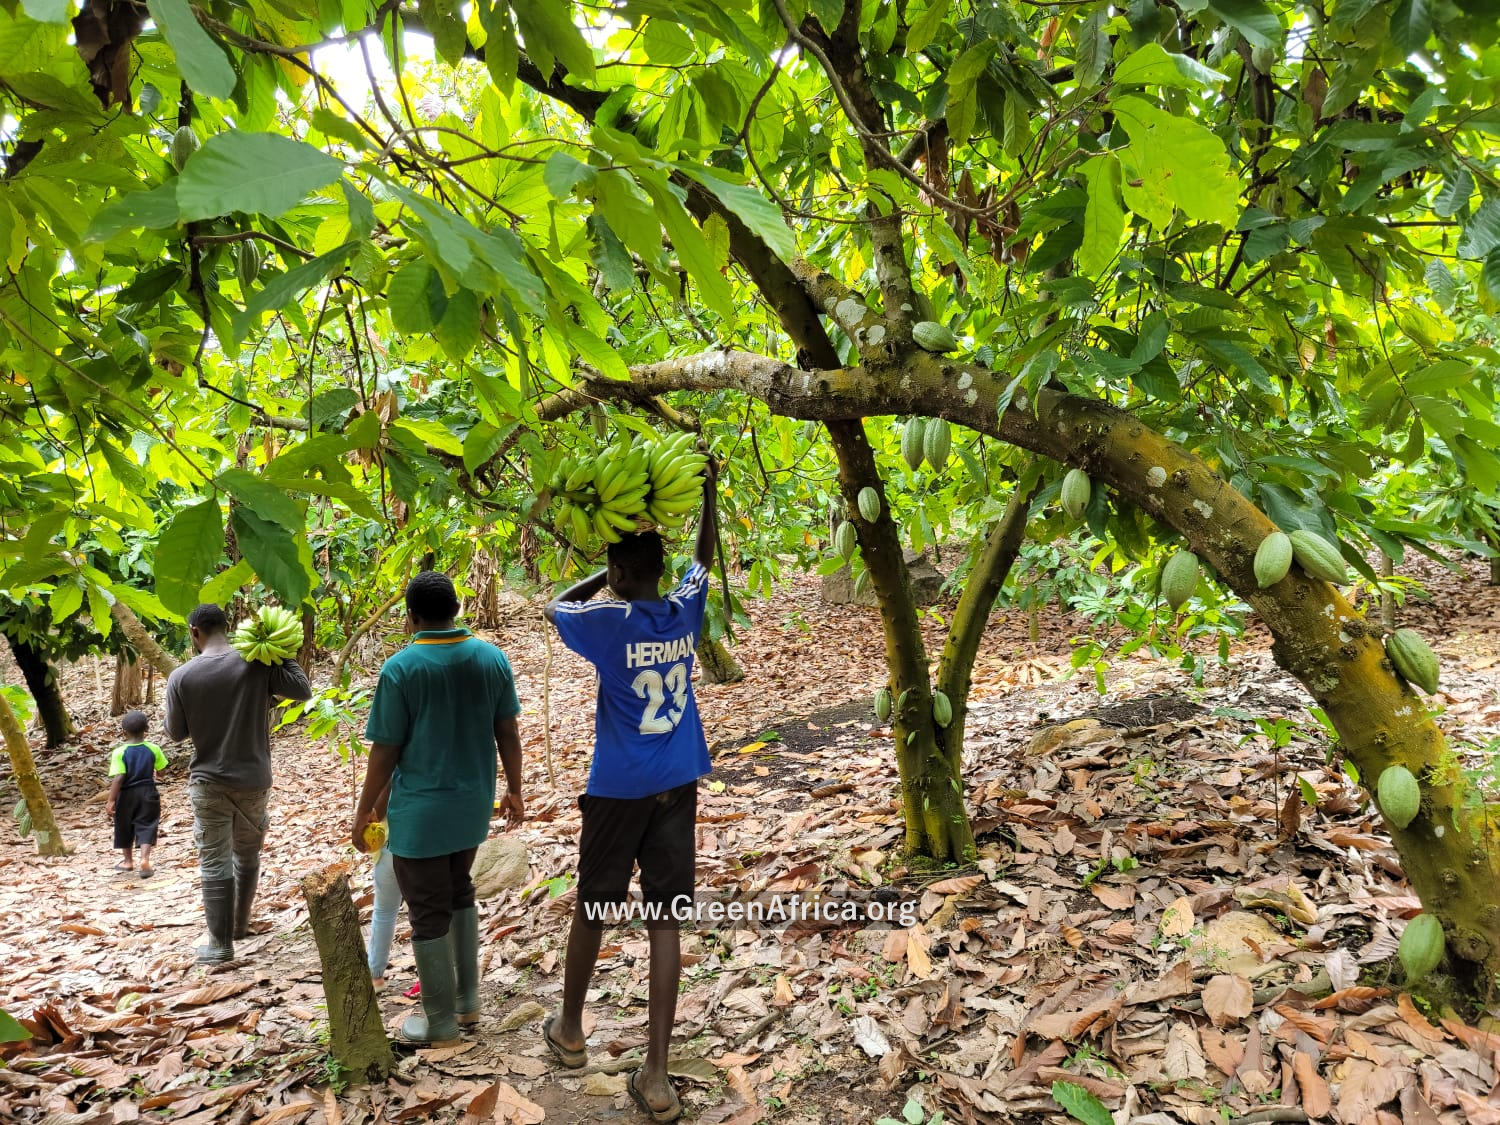 Food Forests Projects in Ghana Africa. Agriculture, Farming and Agroforestry, Agro-Forestry in Ghana